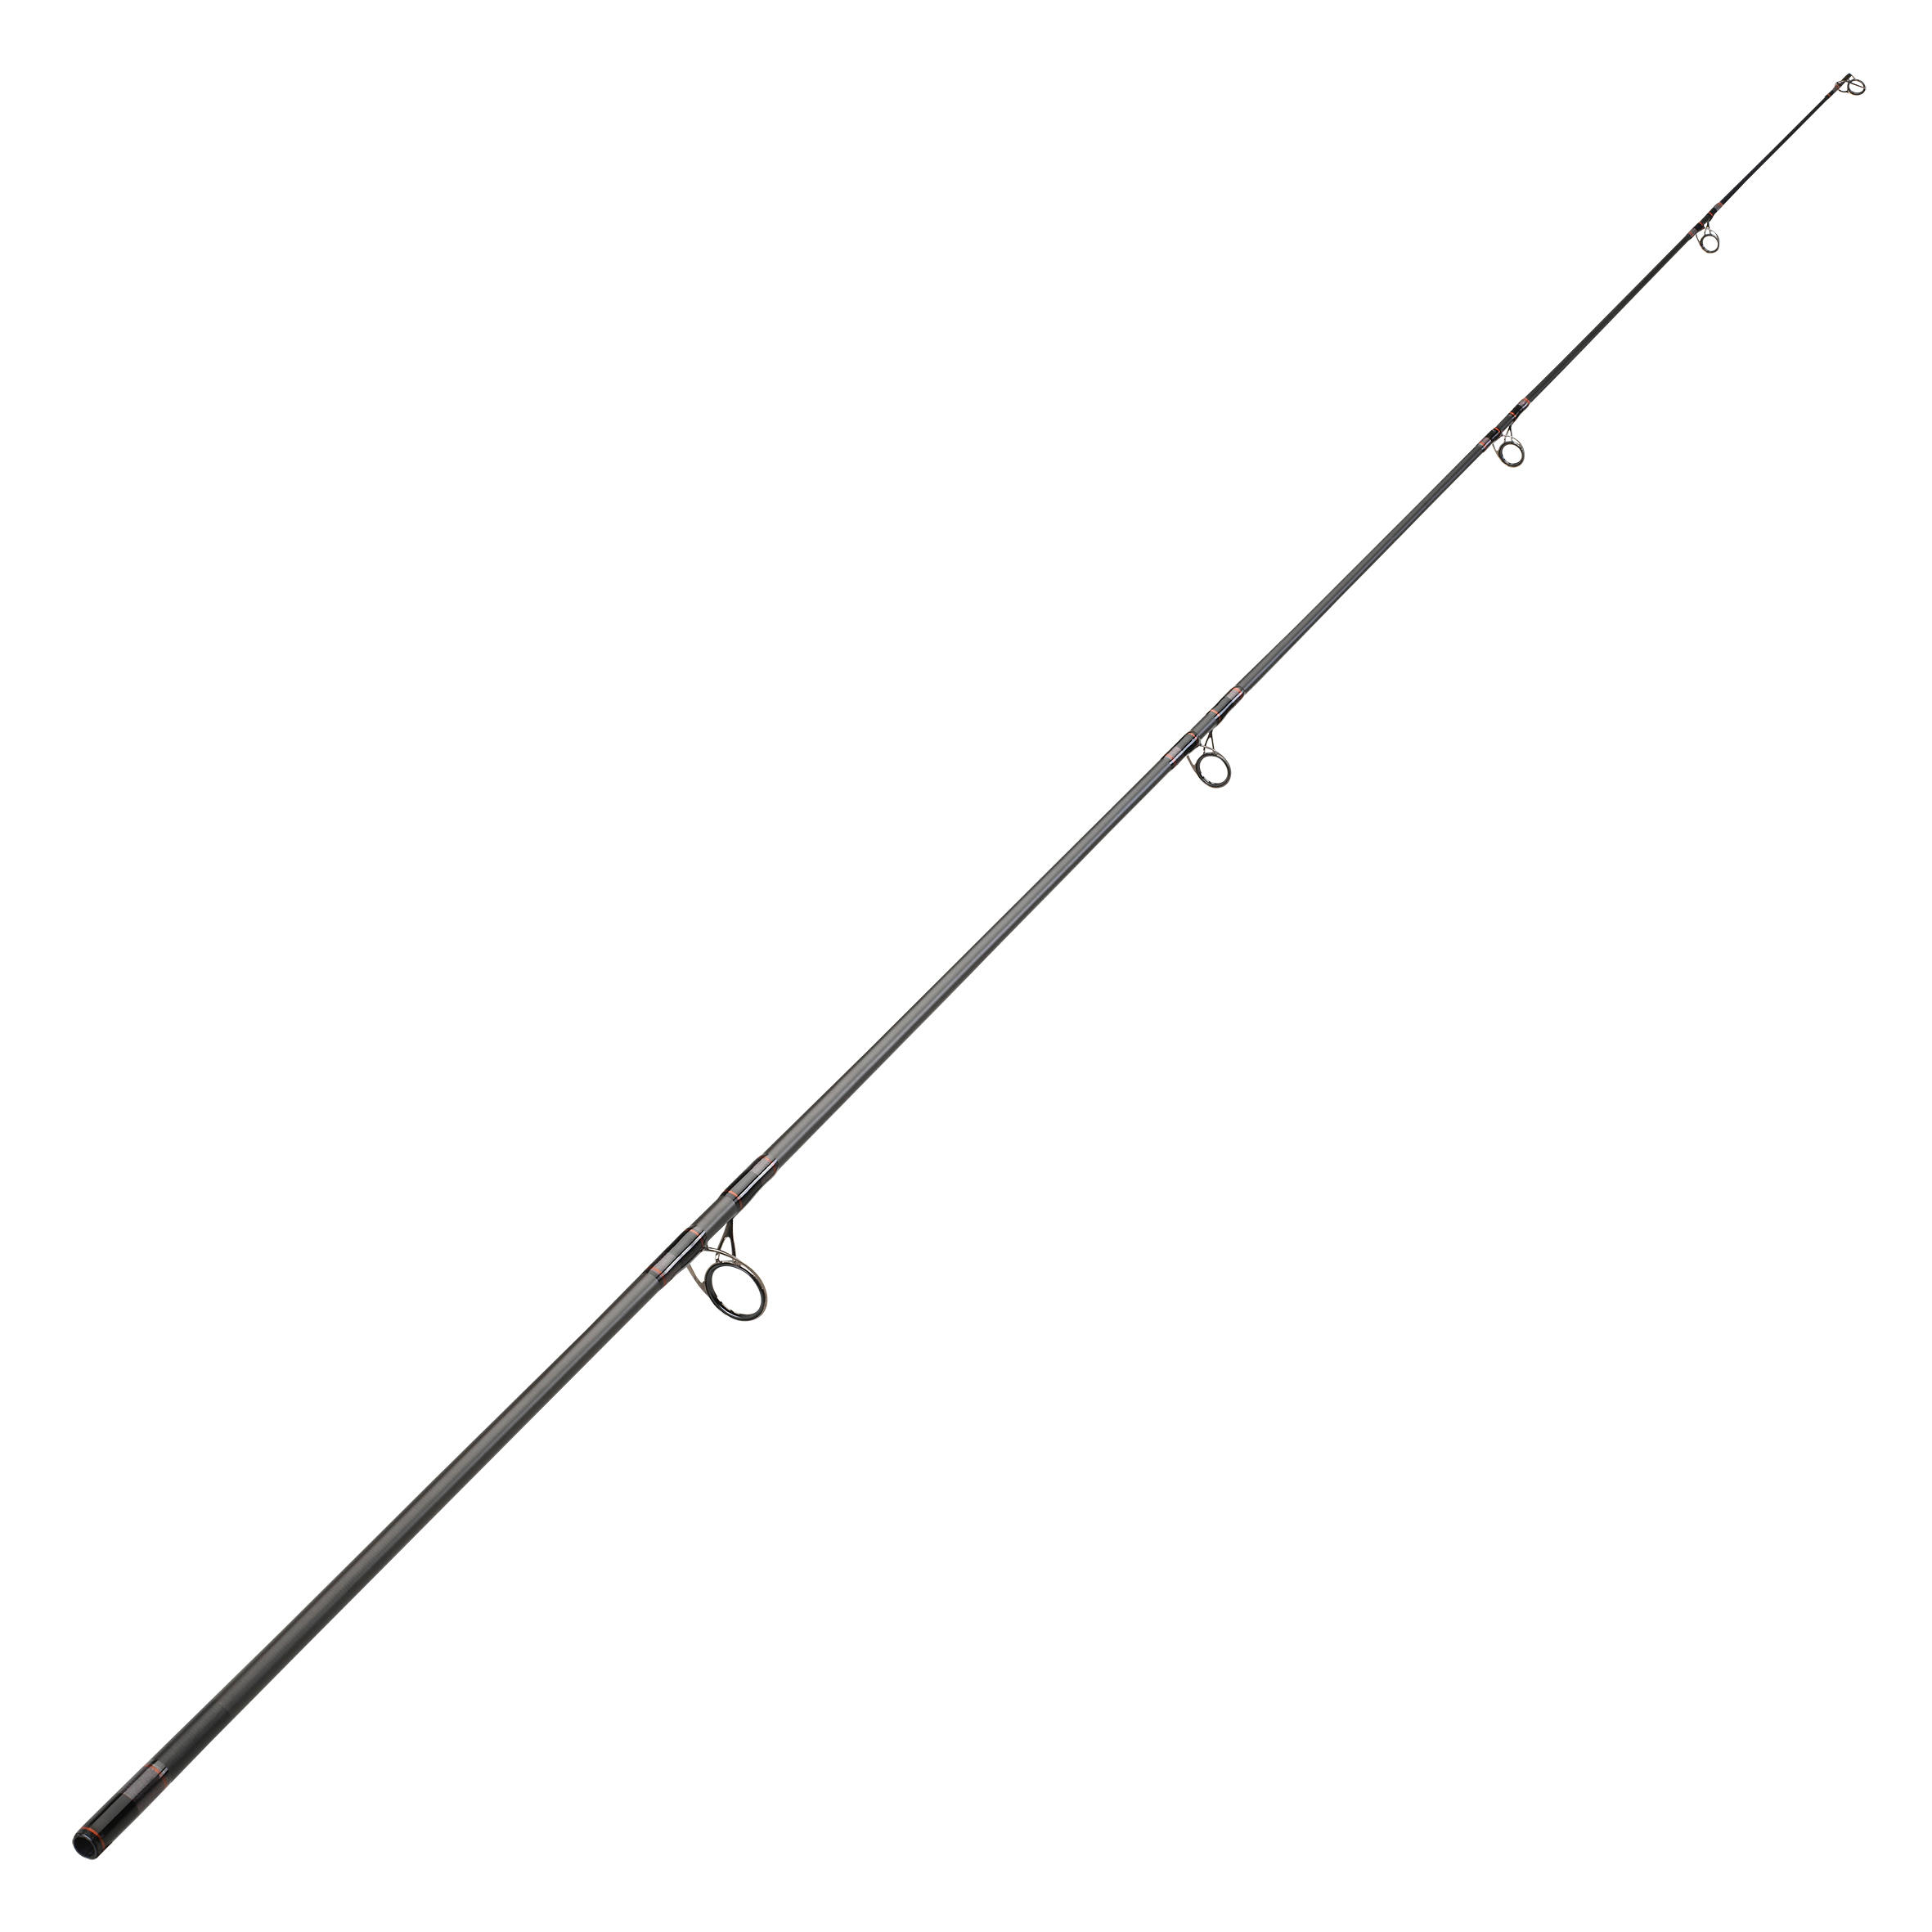 Replacement tip for the 390 cm 9 Xtrem rod (13 feet) Carp fishing 1/1